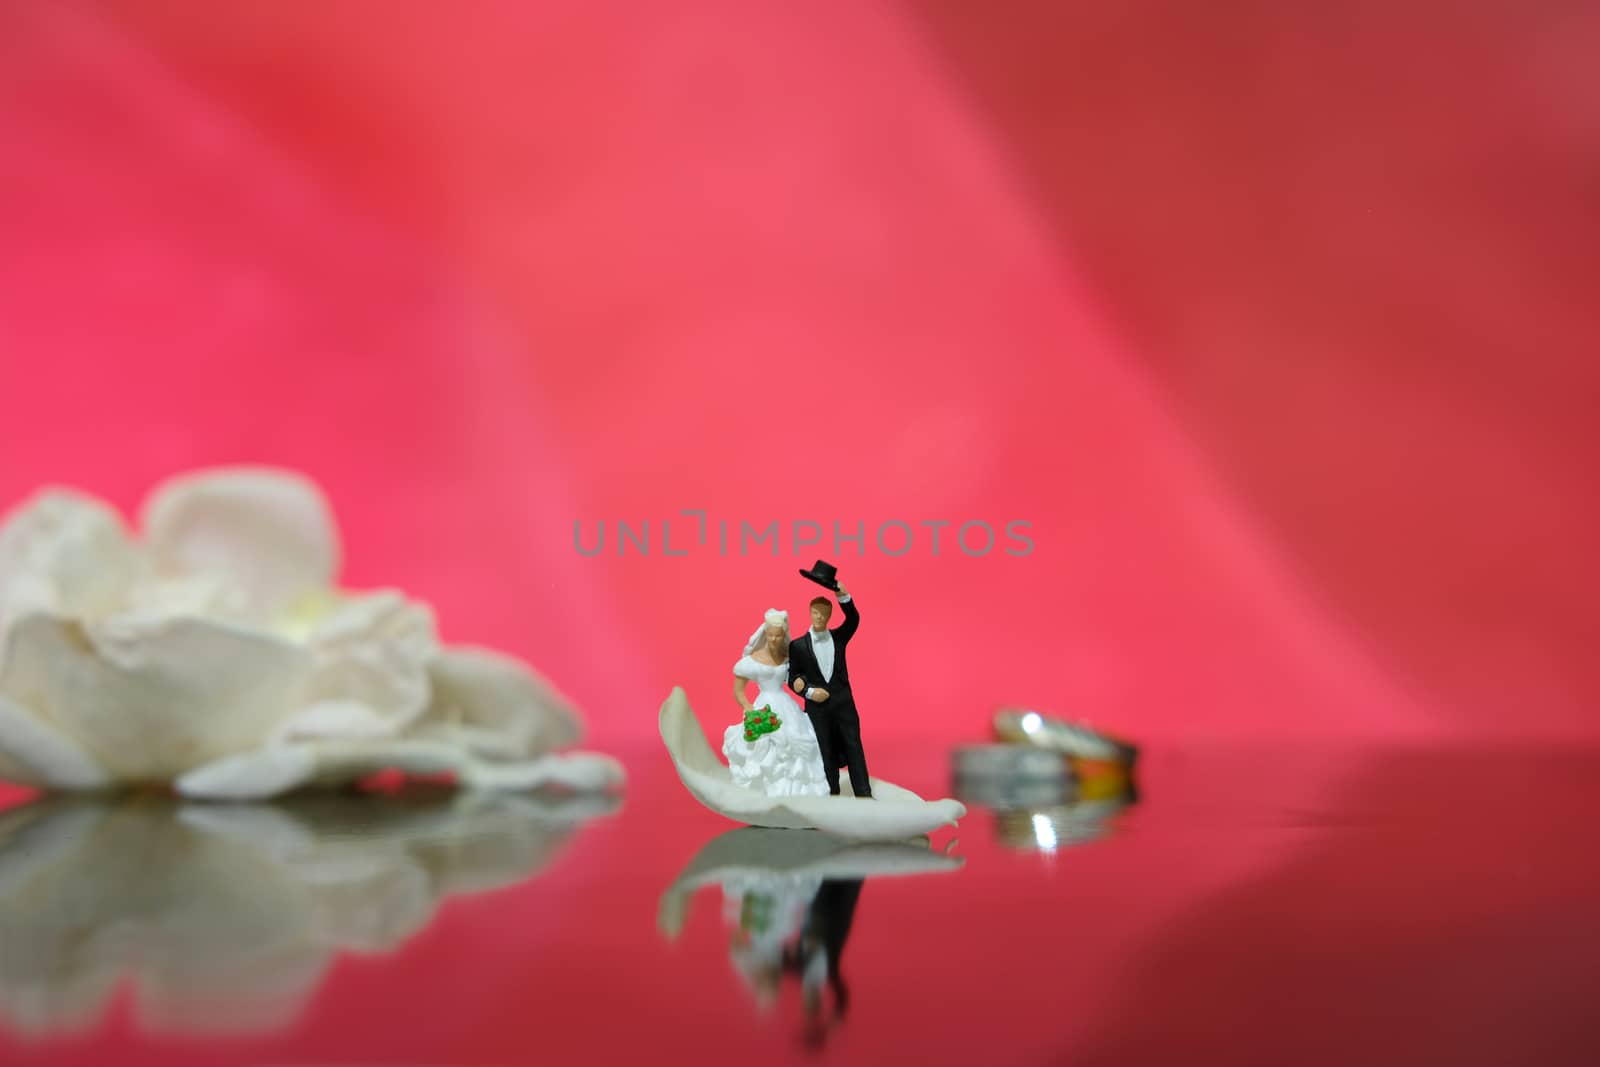 Miniature photography - garden flower outdoor wedding concept, bride and groom walking on shiny floor with white rose petal by Macrostud